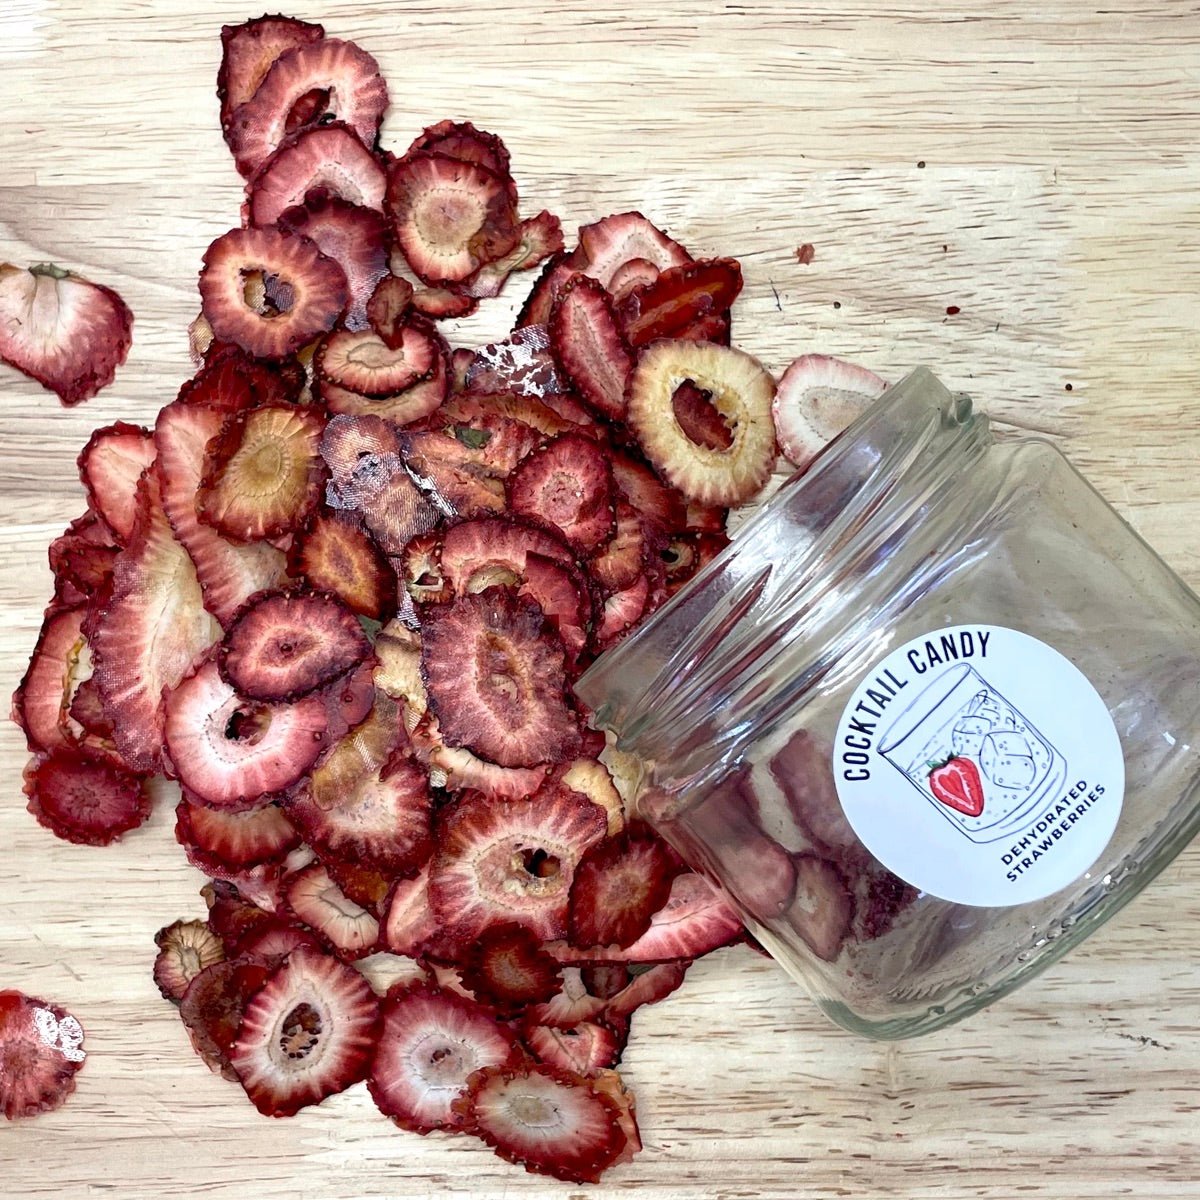 Dehydrated Strawberry Slices